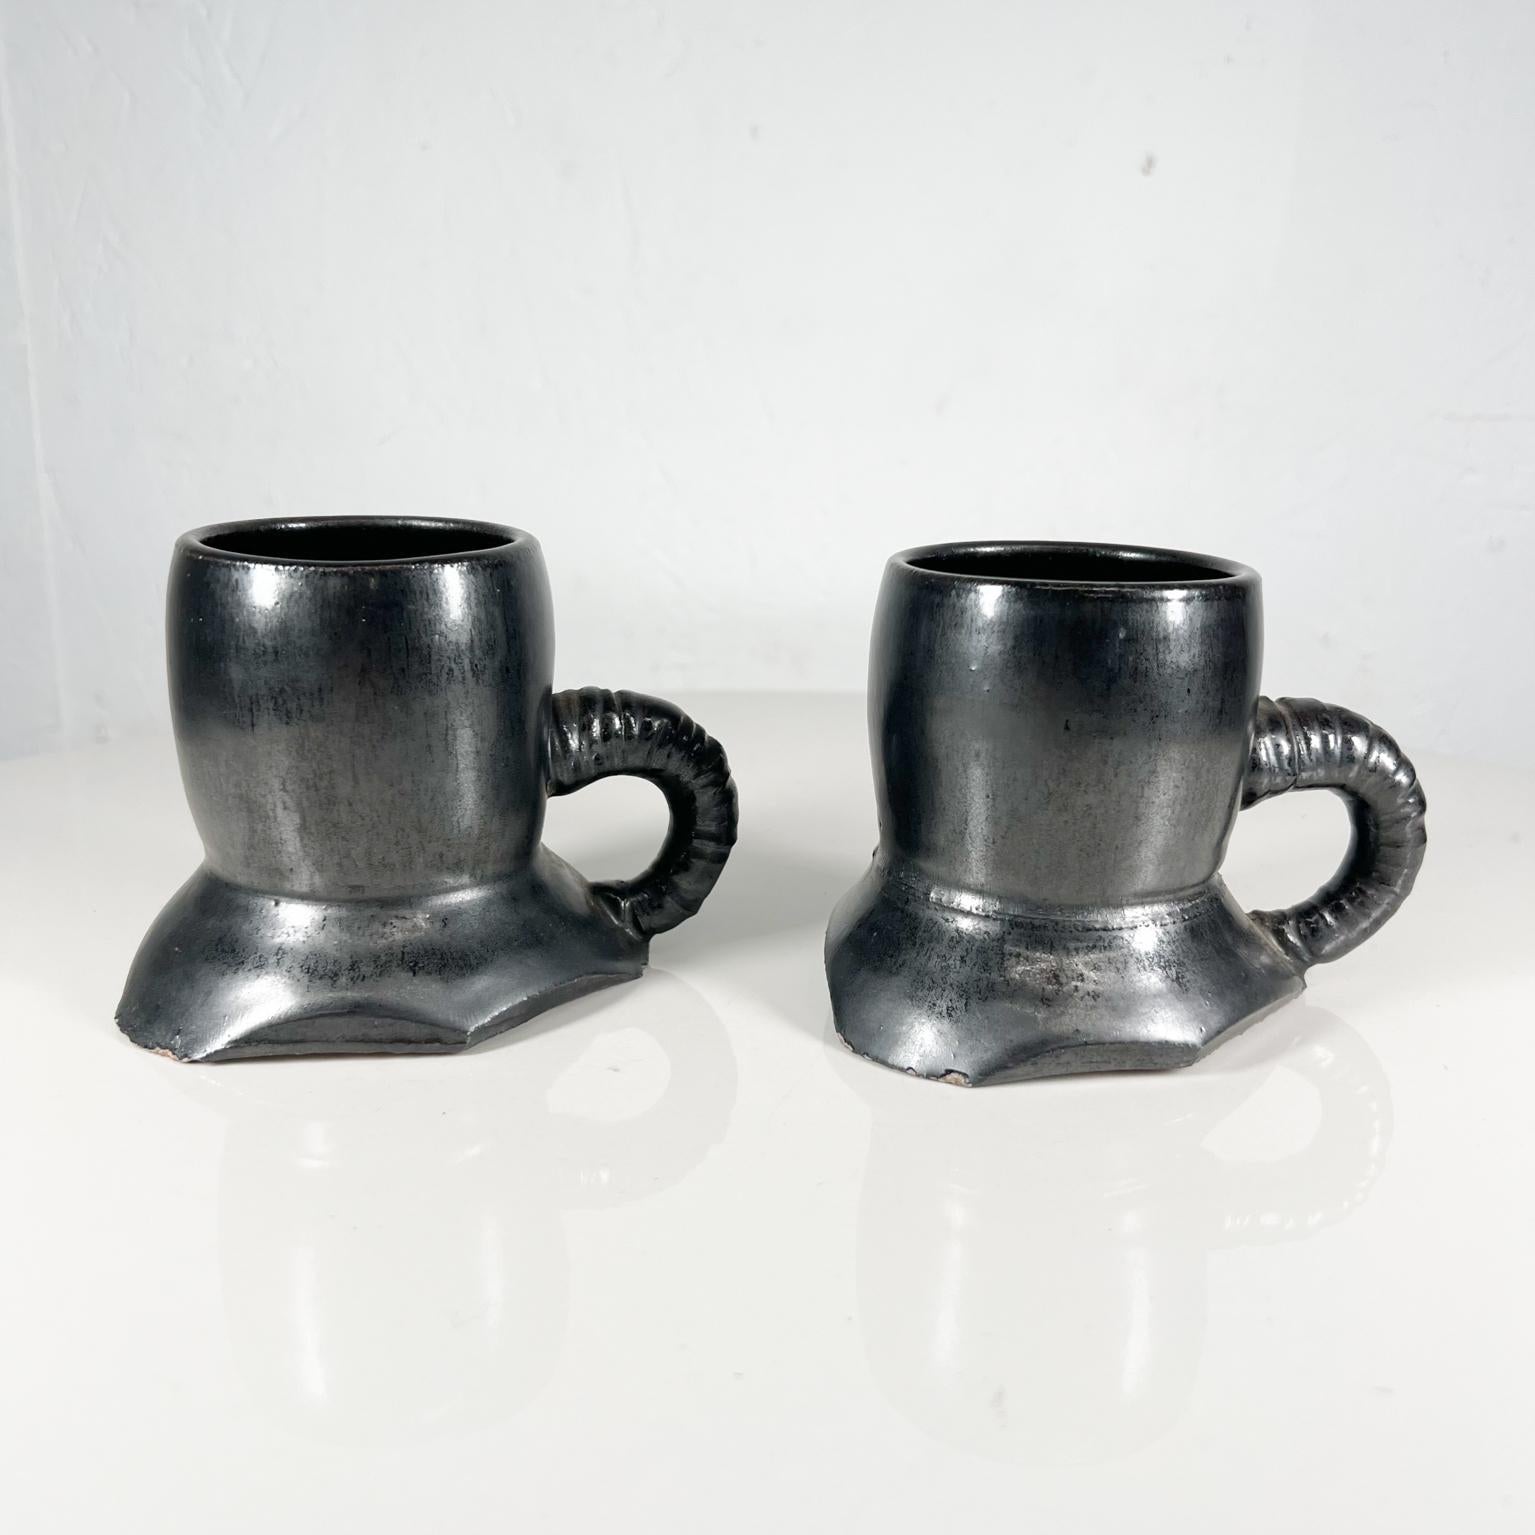 1980s black mugs sculptural pottery art coffee cups signed Melching
Signed by artist 1983
Measures: 3.75 tall x 2.63 diameter 4.75 d x 3.63 w
Preowned unrestored vintage condition
See images provided.
  